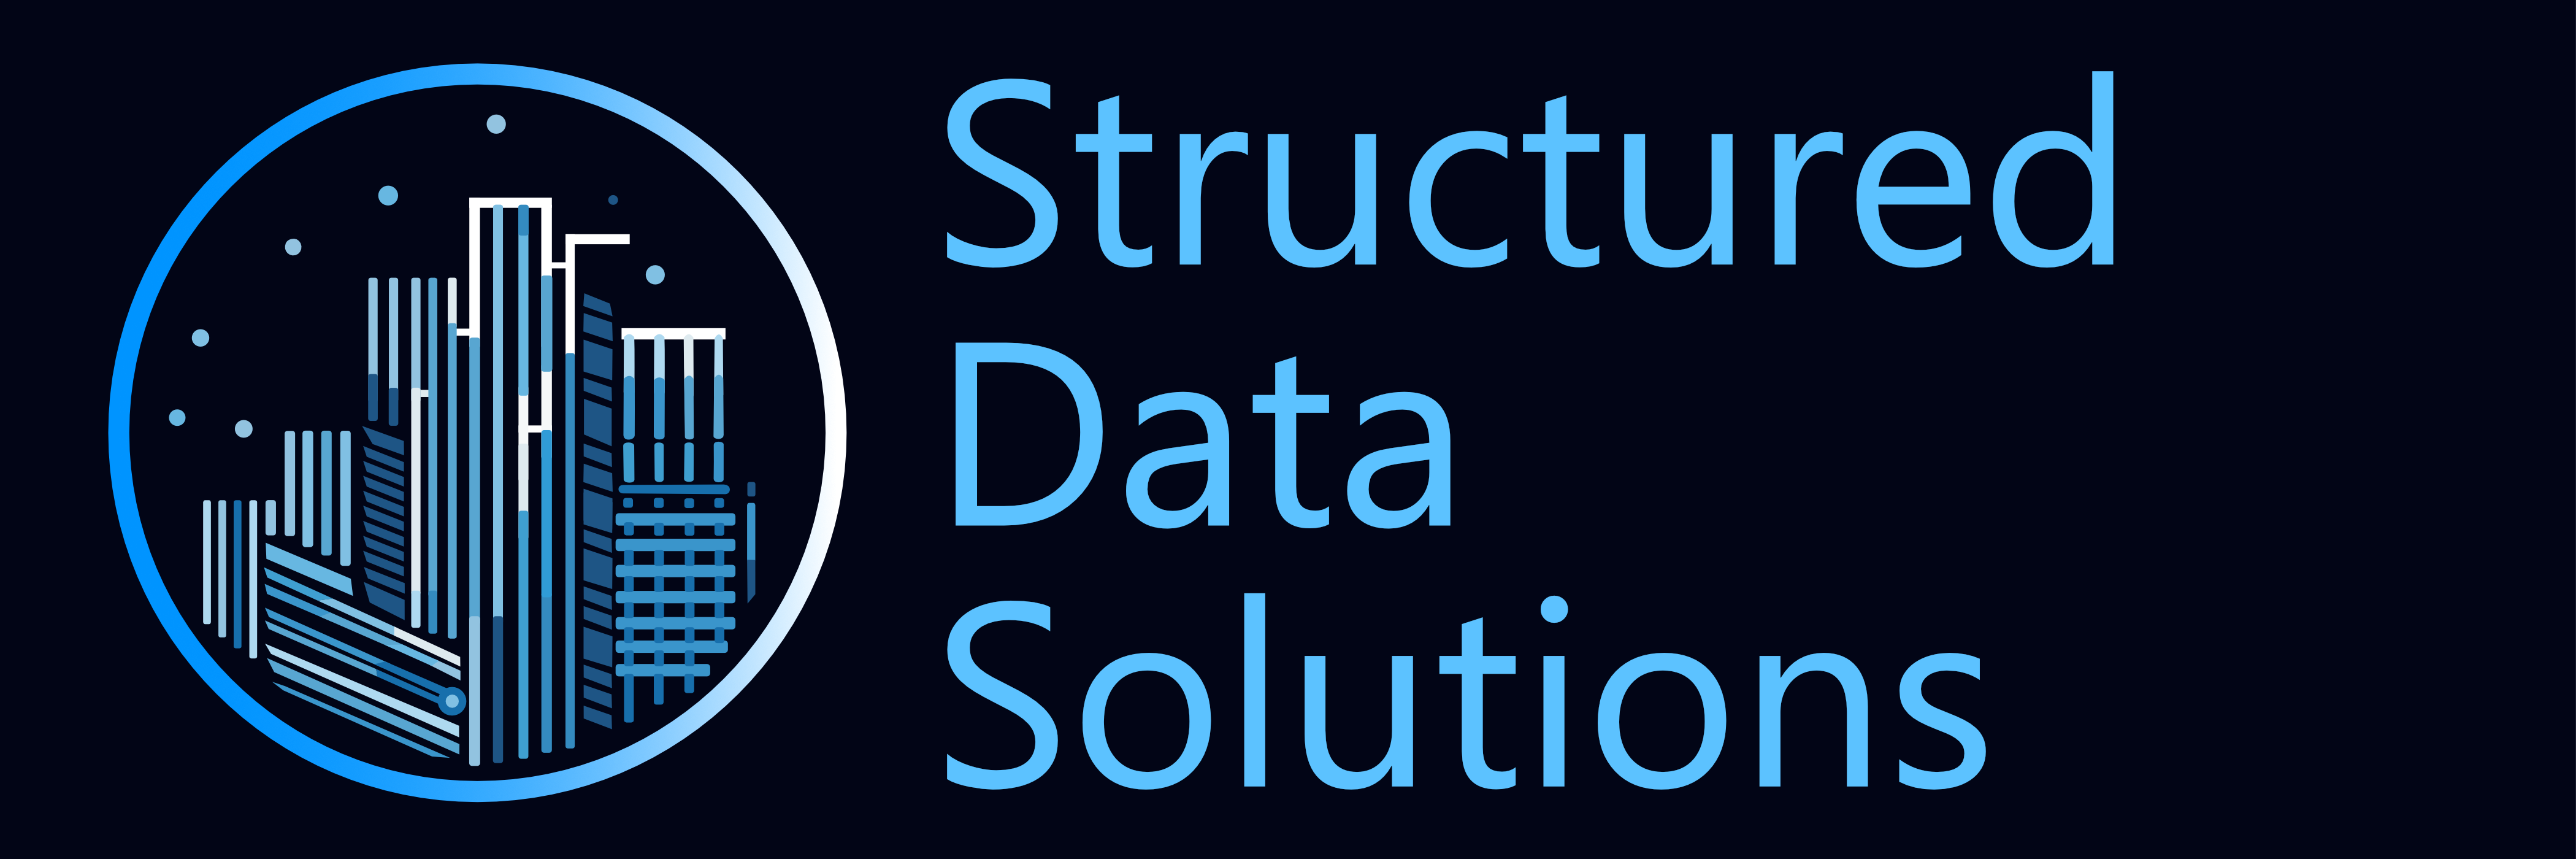 Structured Data Solutions